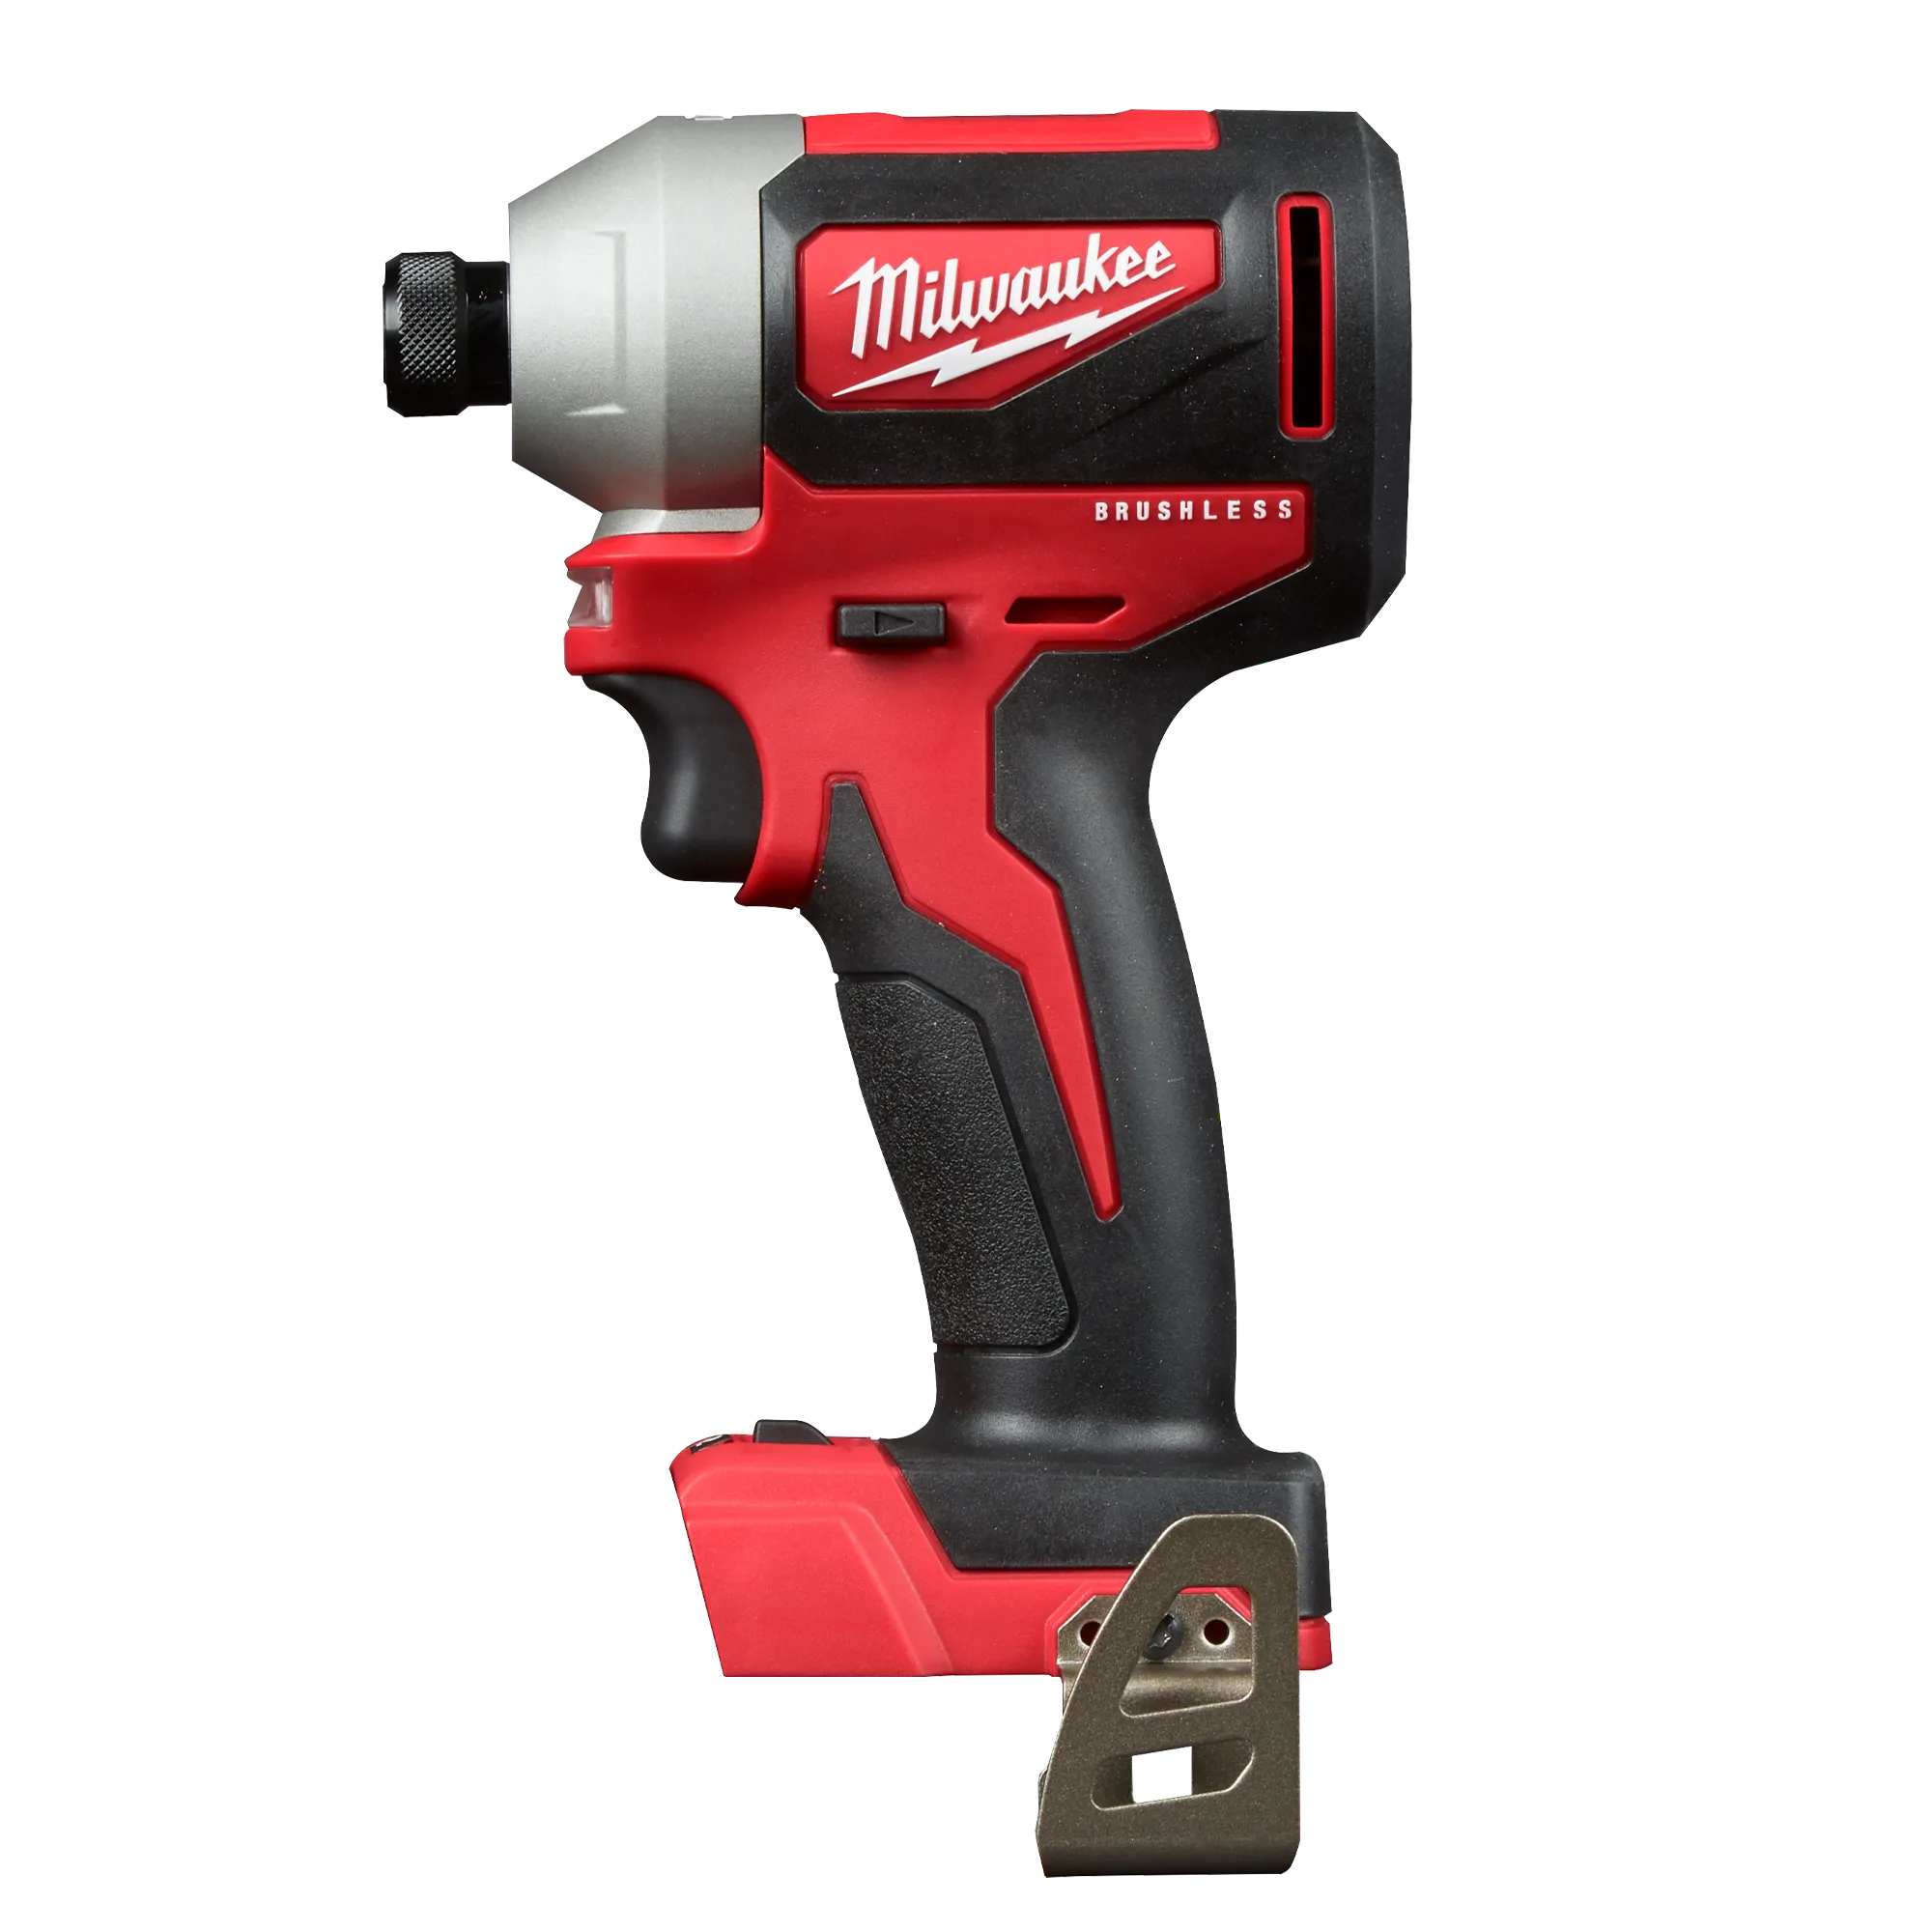 M18 Brushless 1/4" Hex 3 Speed Impact Driver Bare Tool